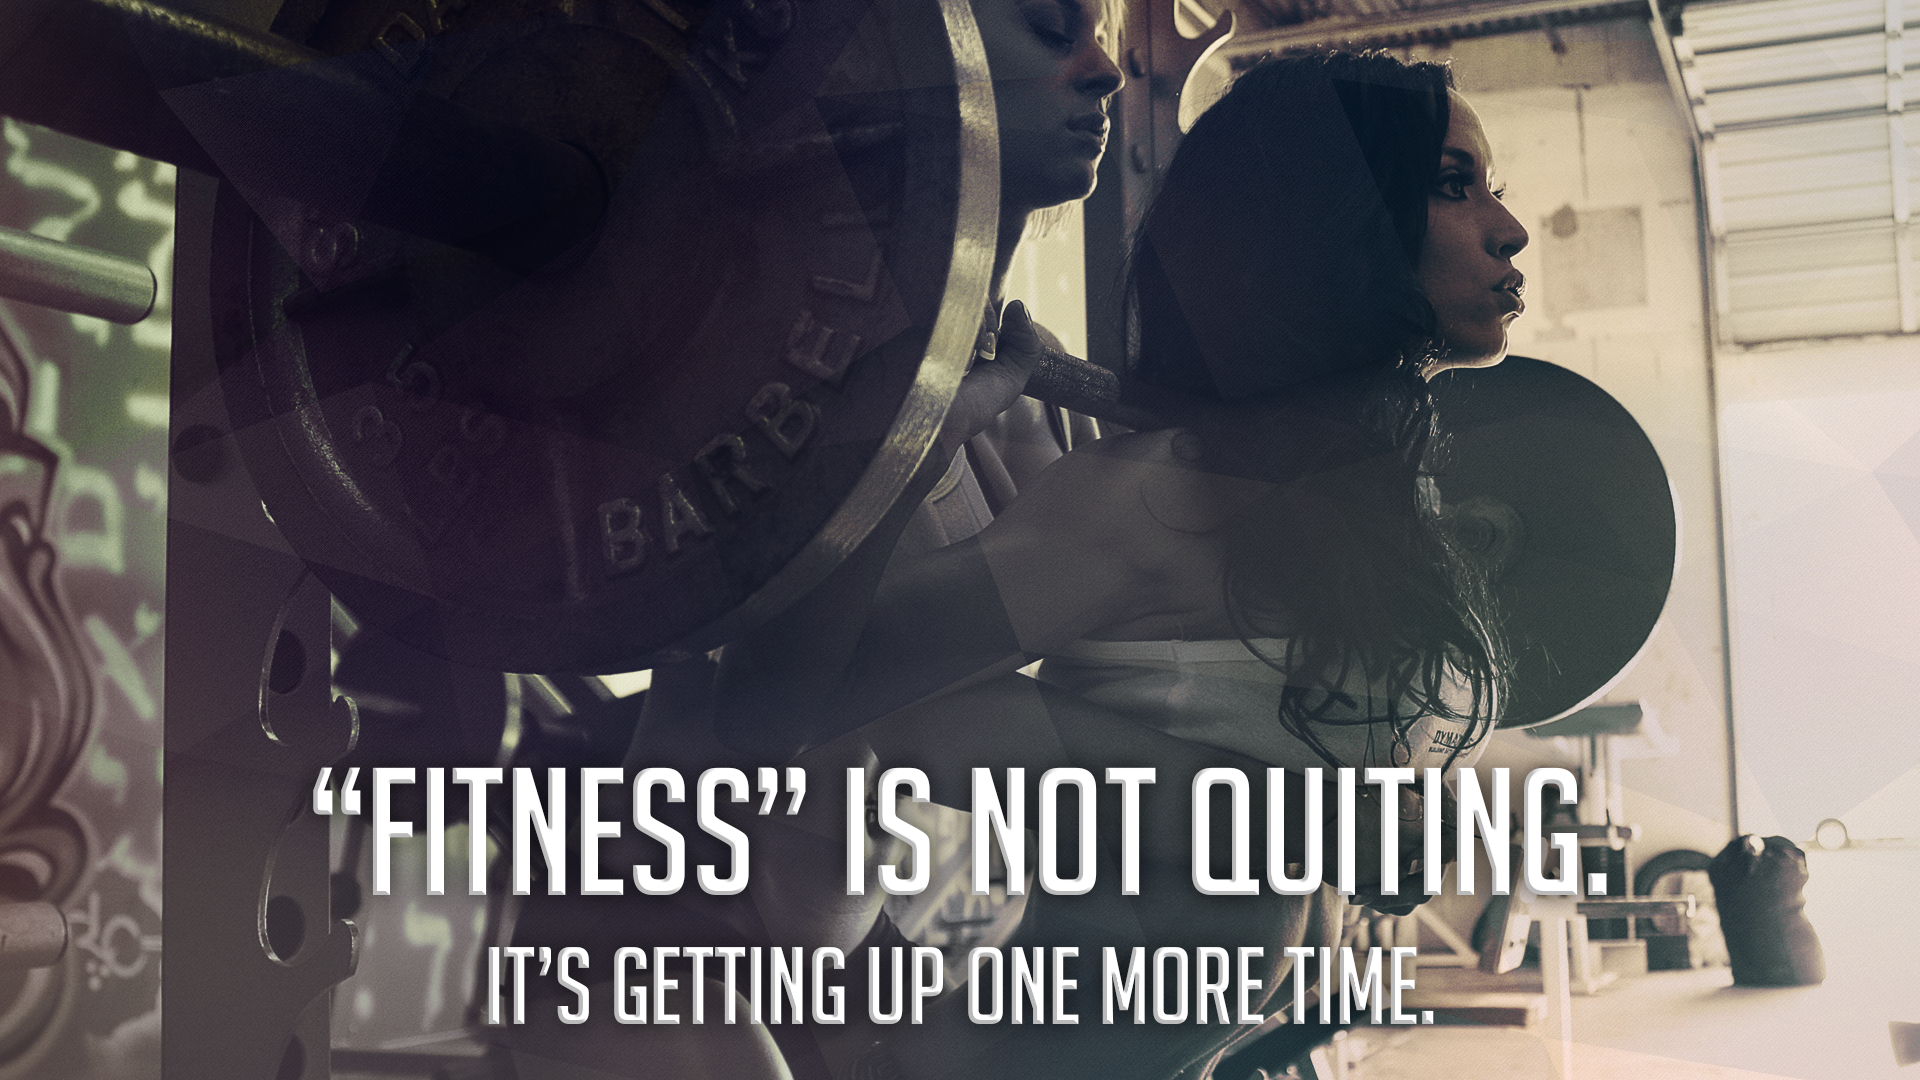 Fitness Is Not Quiting Wallpaper